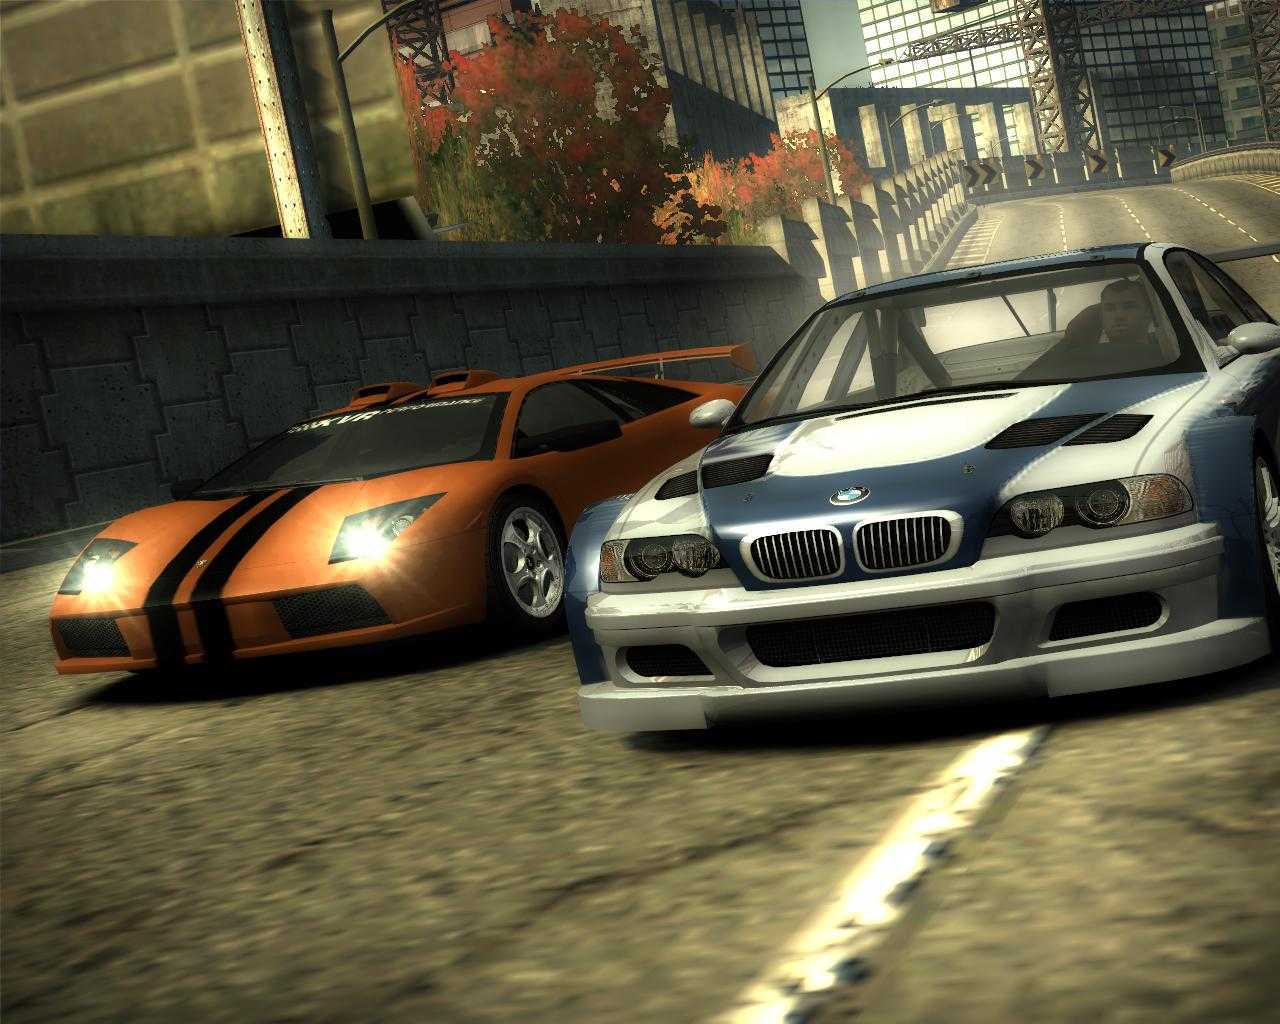 Нид фор СПИД most wanted 2005. Нфс мост вантед 2005. Гонки NFS most wanted. Need for Speed MW 2005.